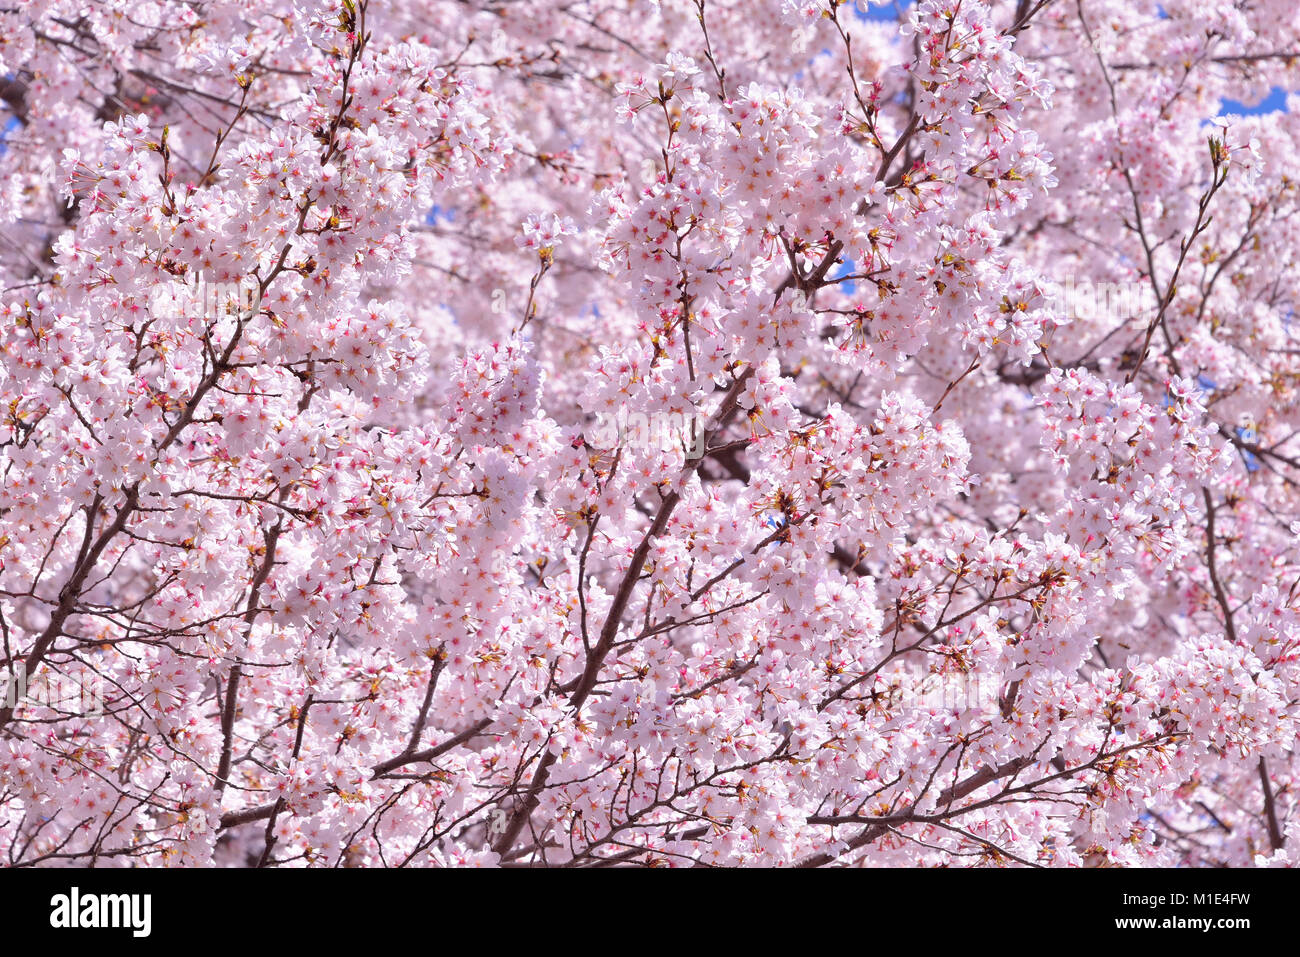 Cherry blossoms in full bloom, Japan Stock Photo